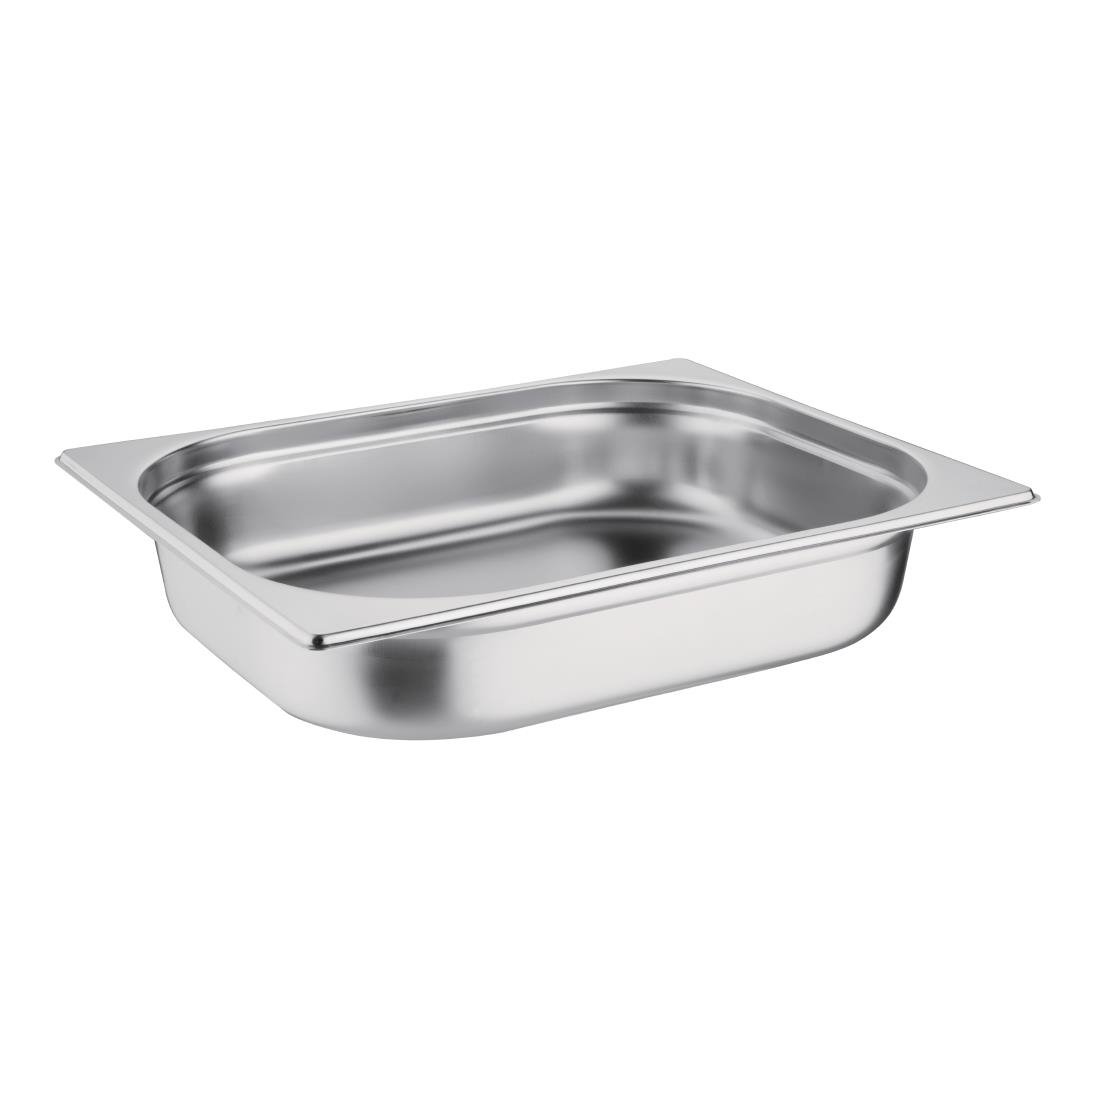 Stainless Steel Gastronorm 1/2 6.5cm Deep (K927)